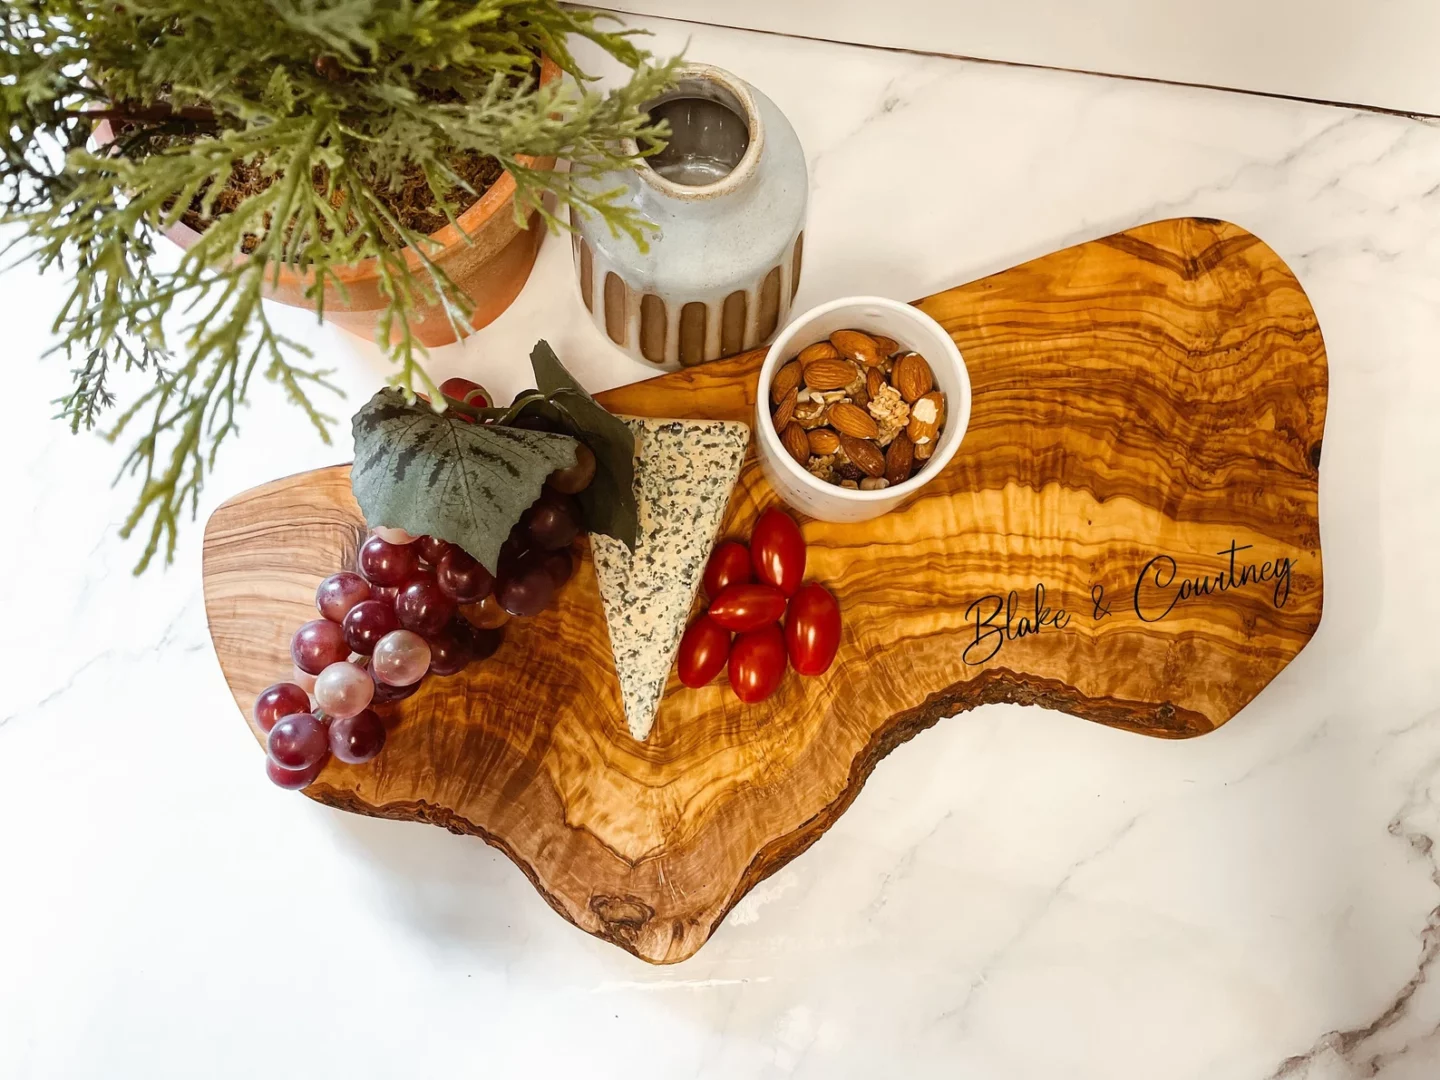 Cheese and grapes plated on a live edge, olive wood charcuterie board